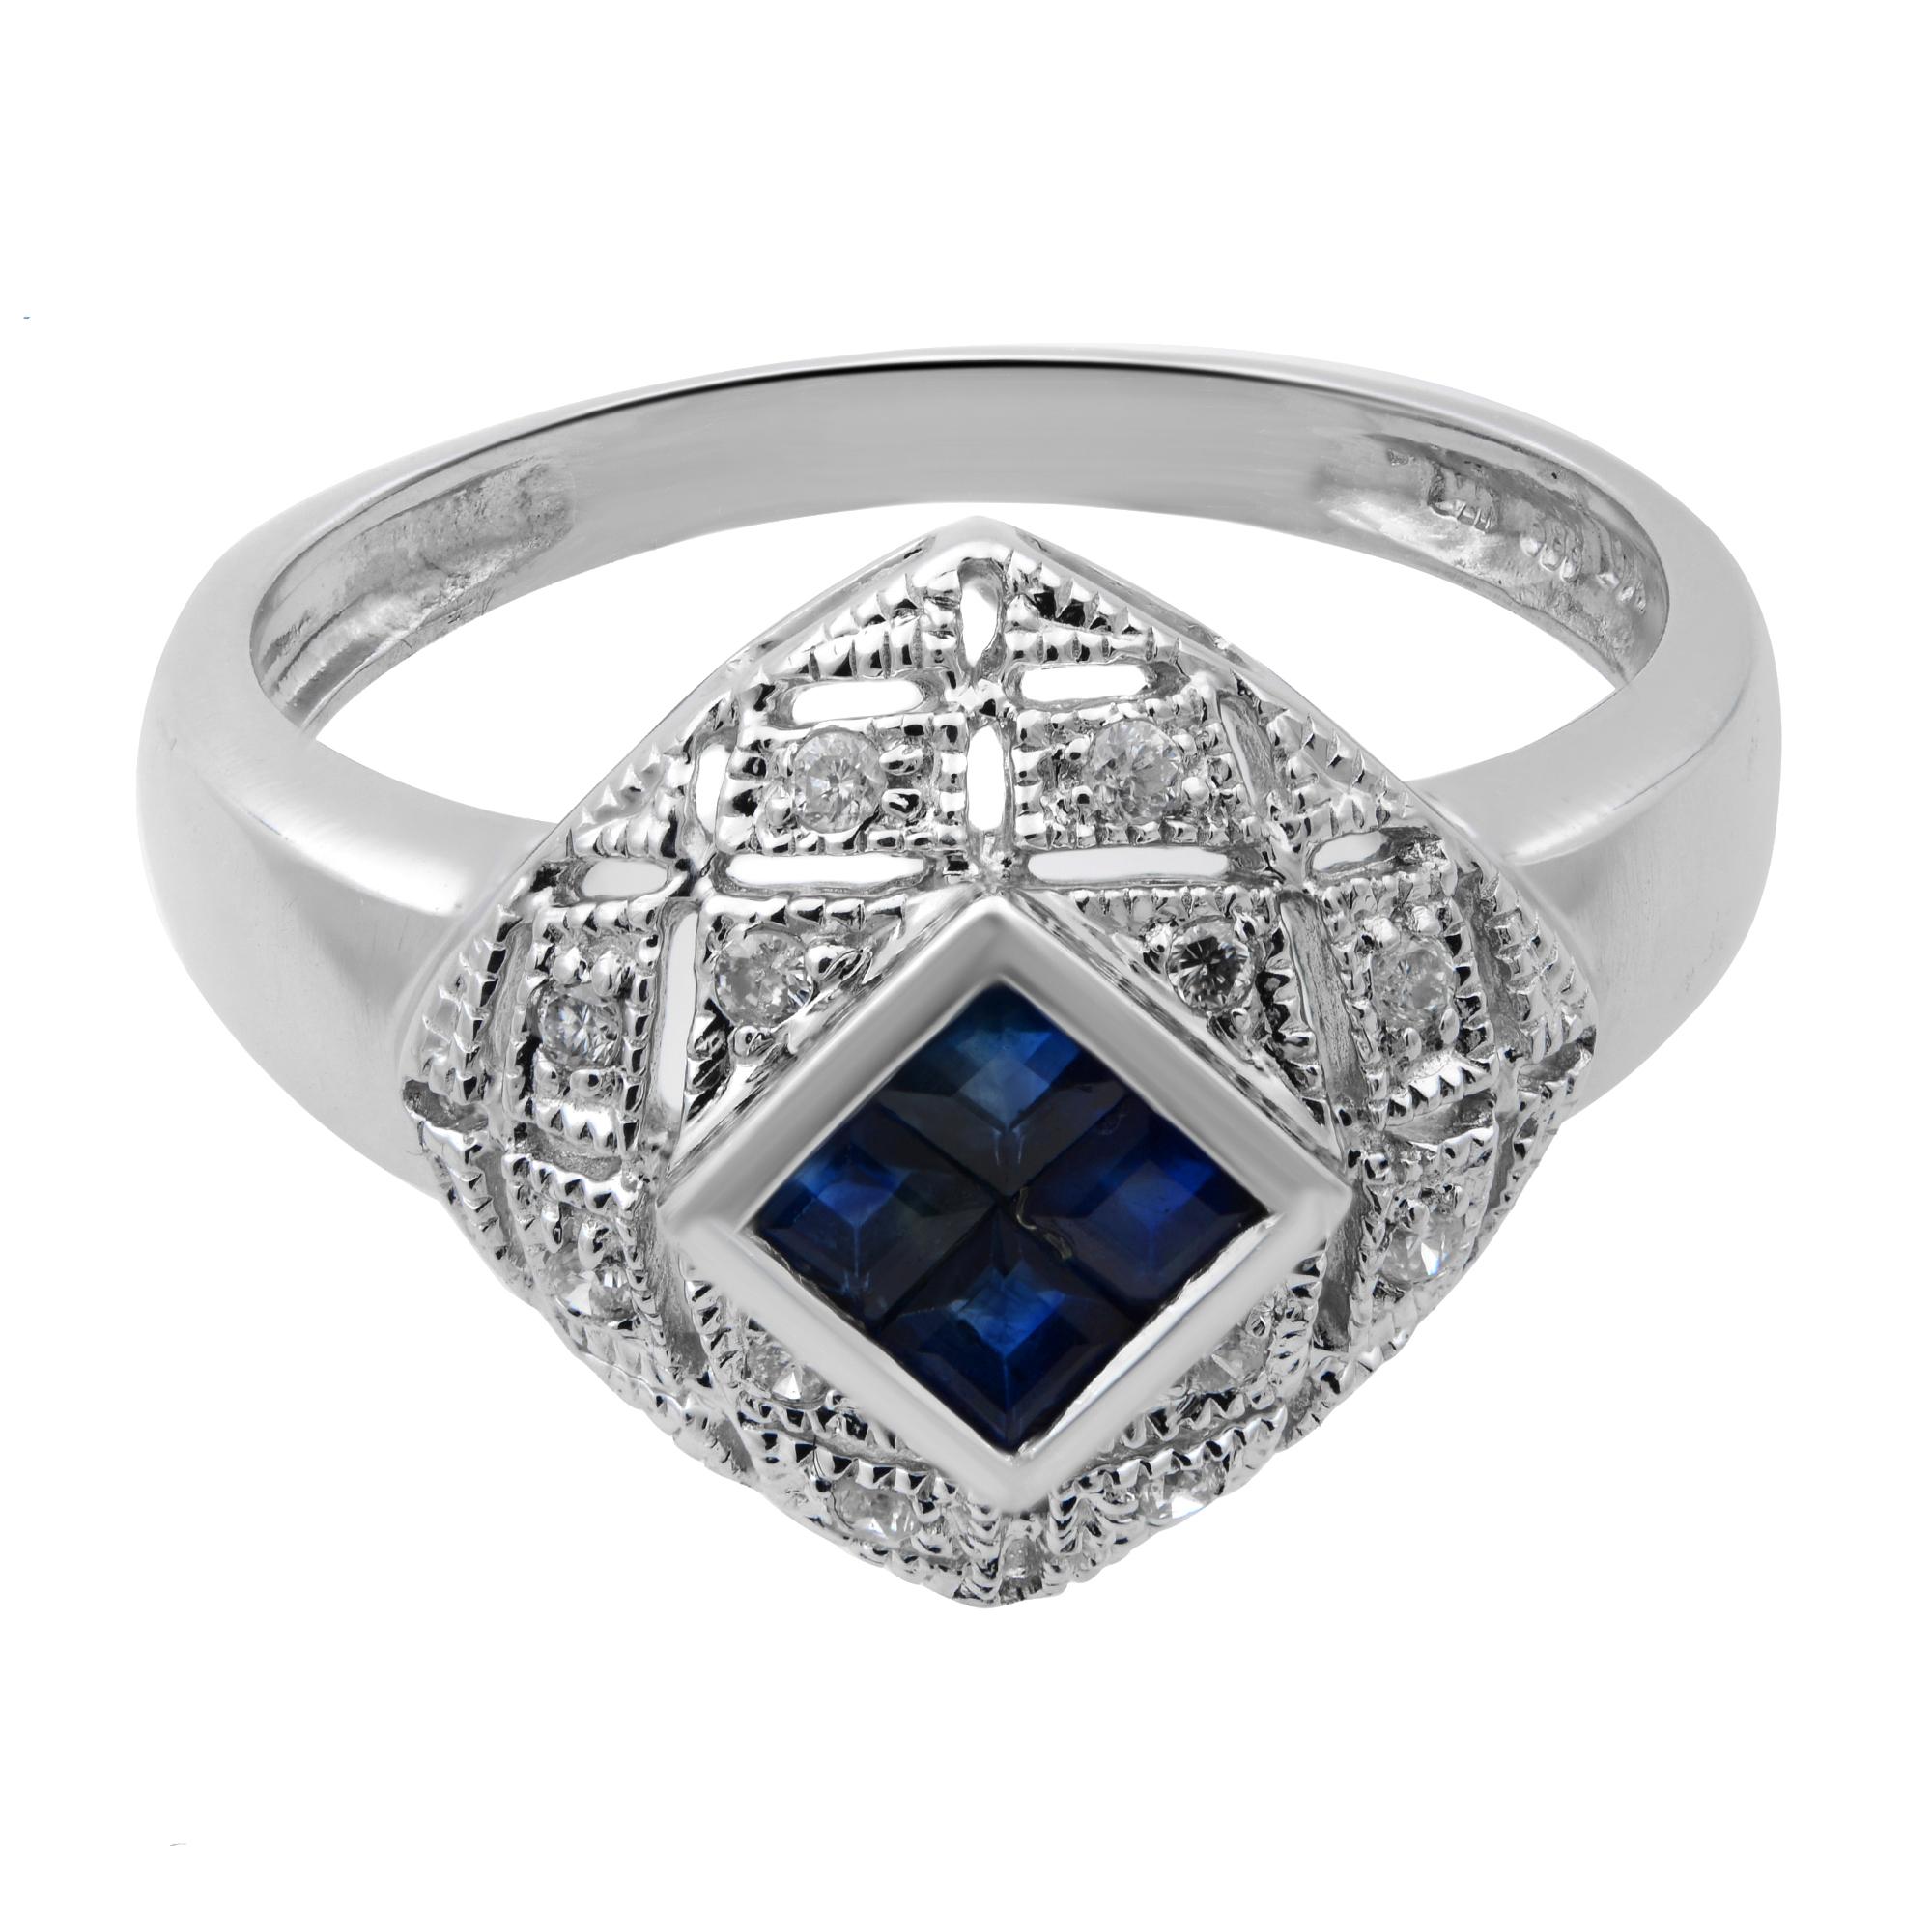 This beautiful ladies ring is encrusted with 0.25 carat of princess cut blue sapphire and 0.10 carat of white shimmering diamonds. The ring is crafted in 14K white gold. Ring size 7. Total weight: 3.30 grams. Great preowned condition. Comes with a